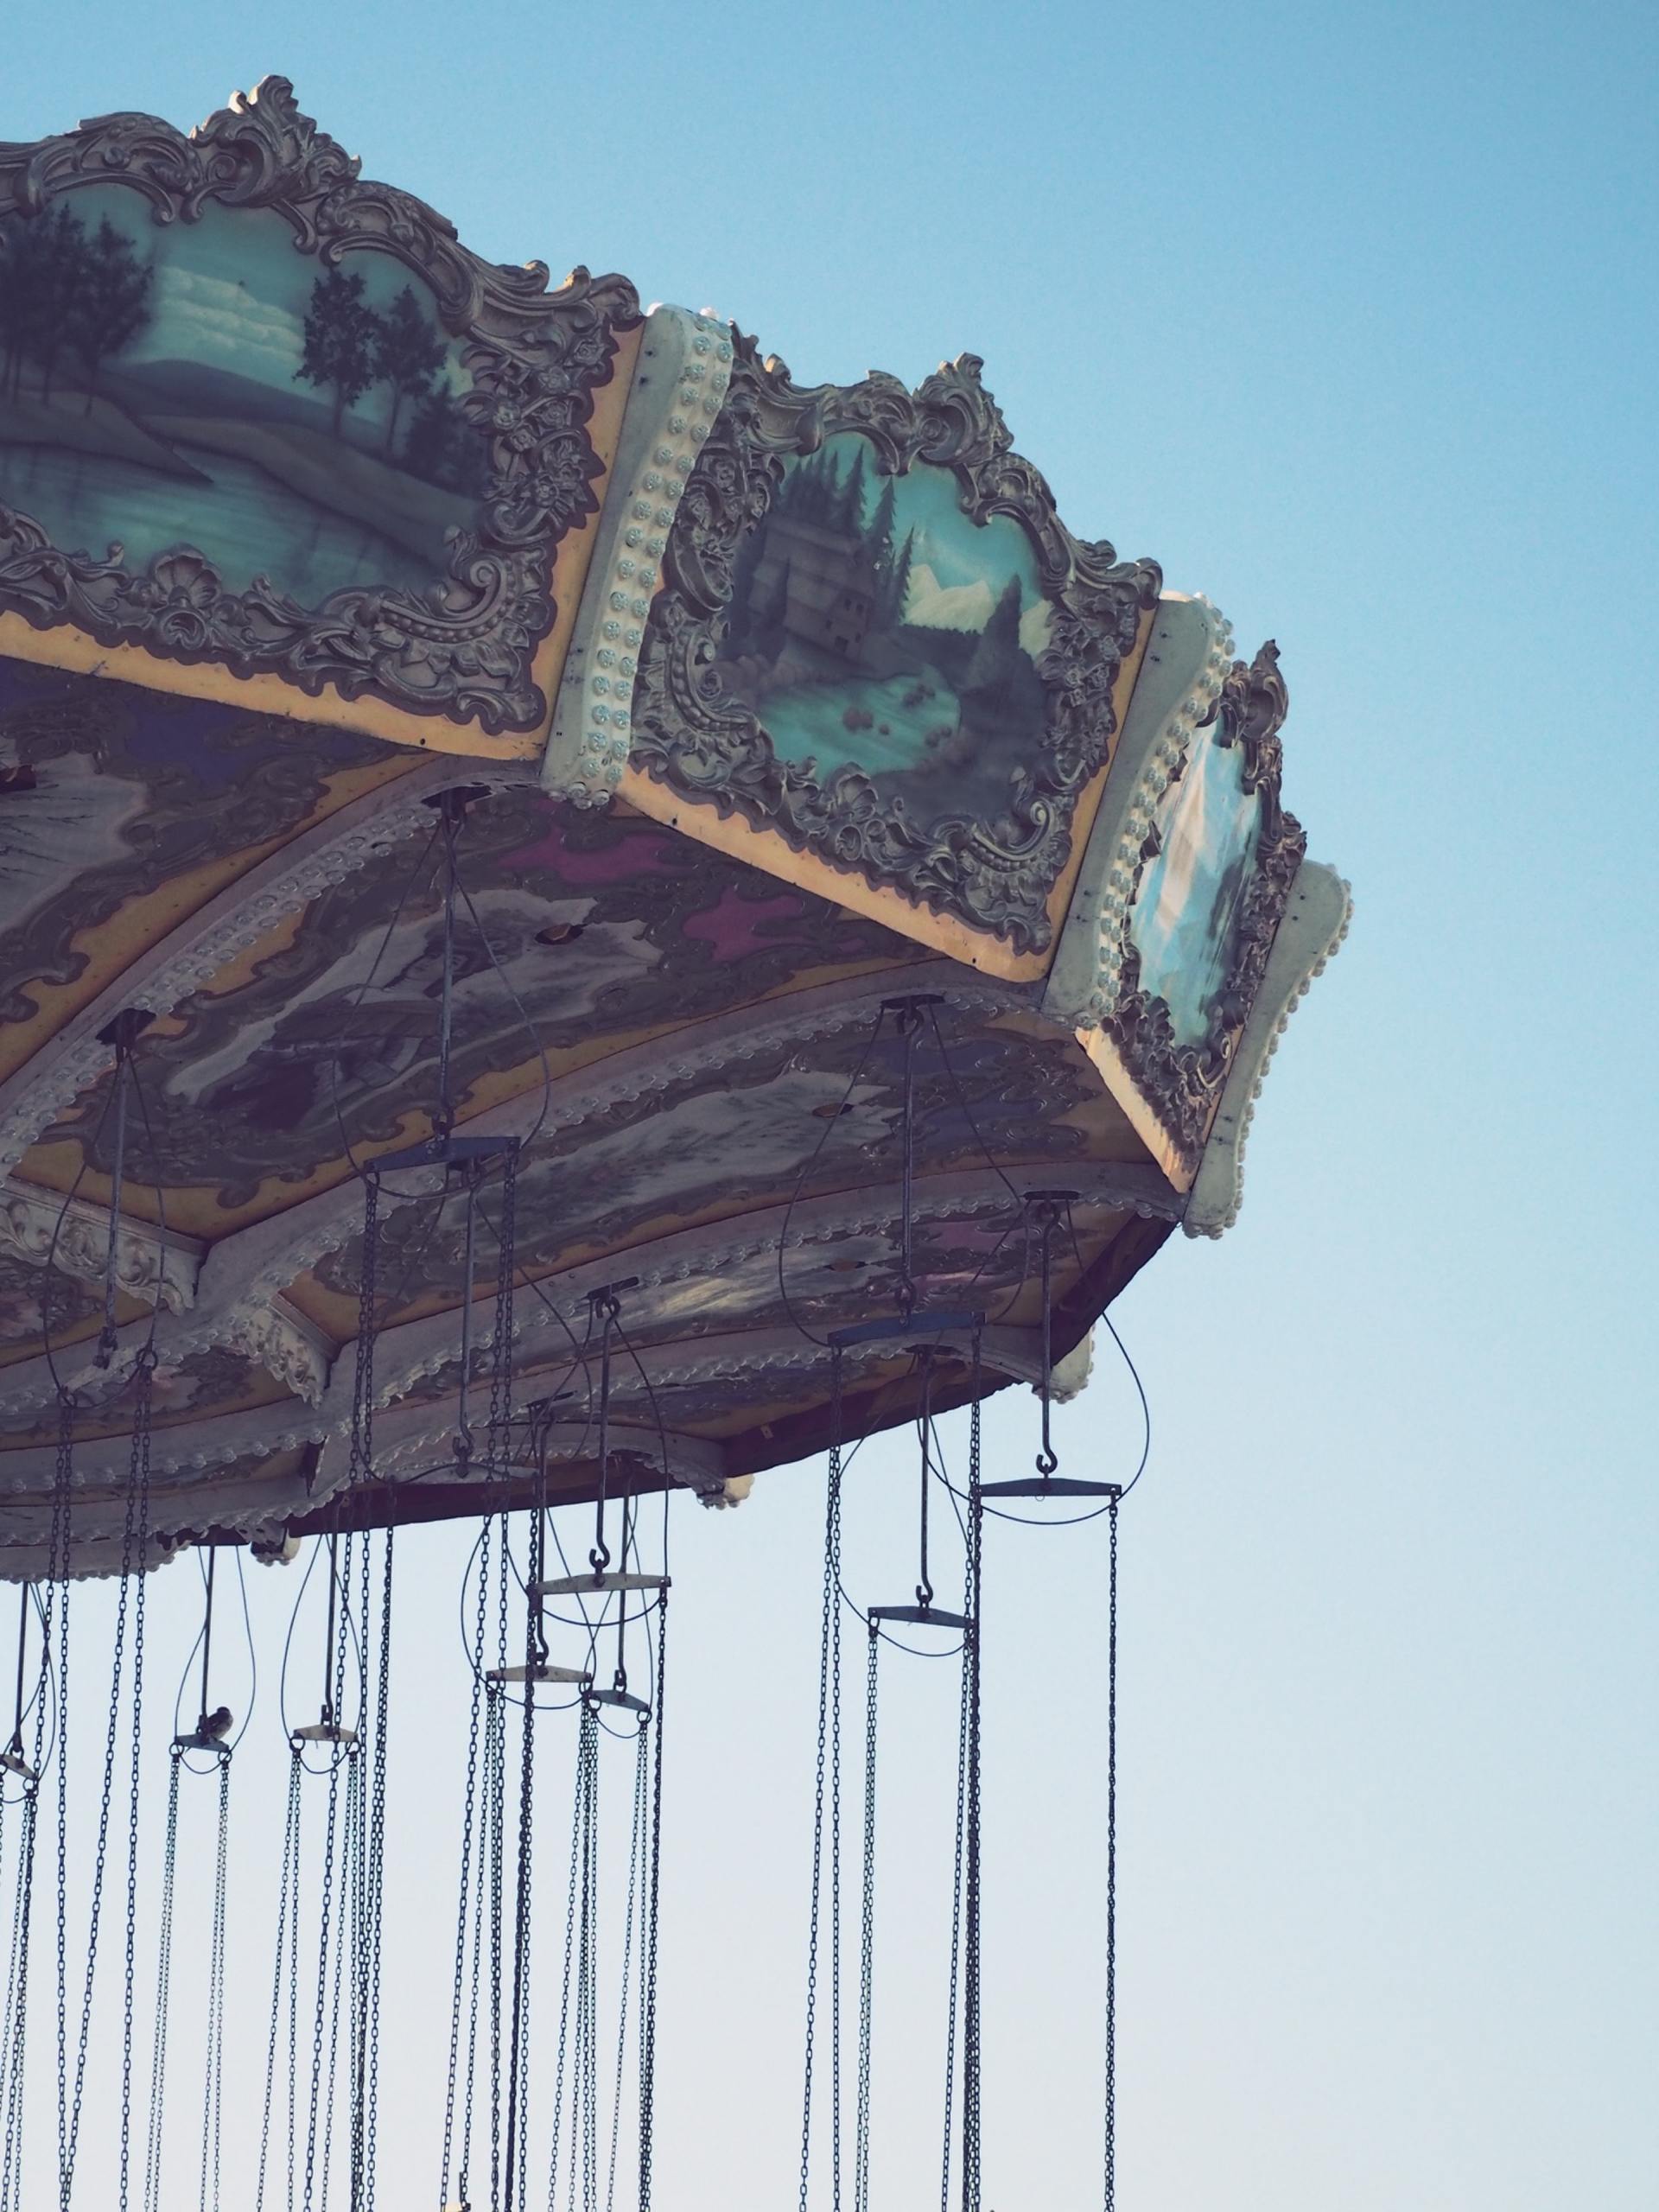 event with carnival rides